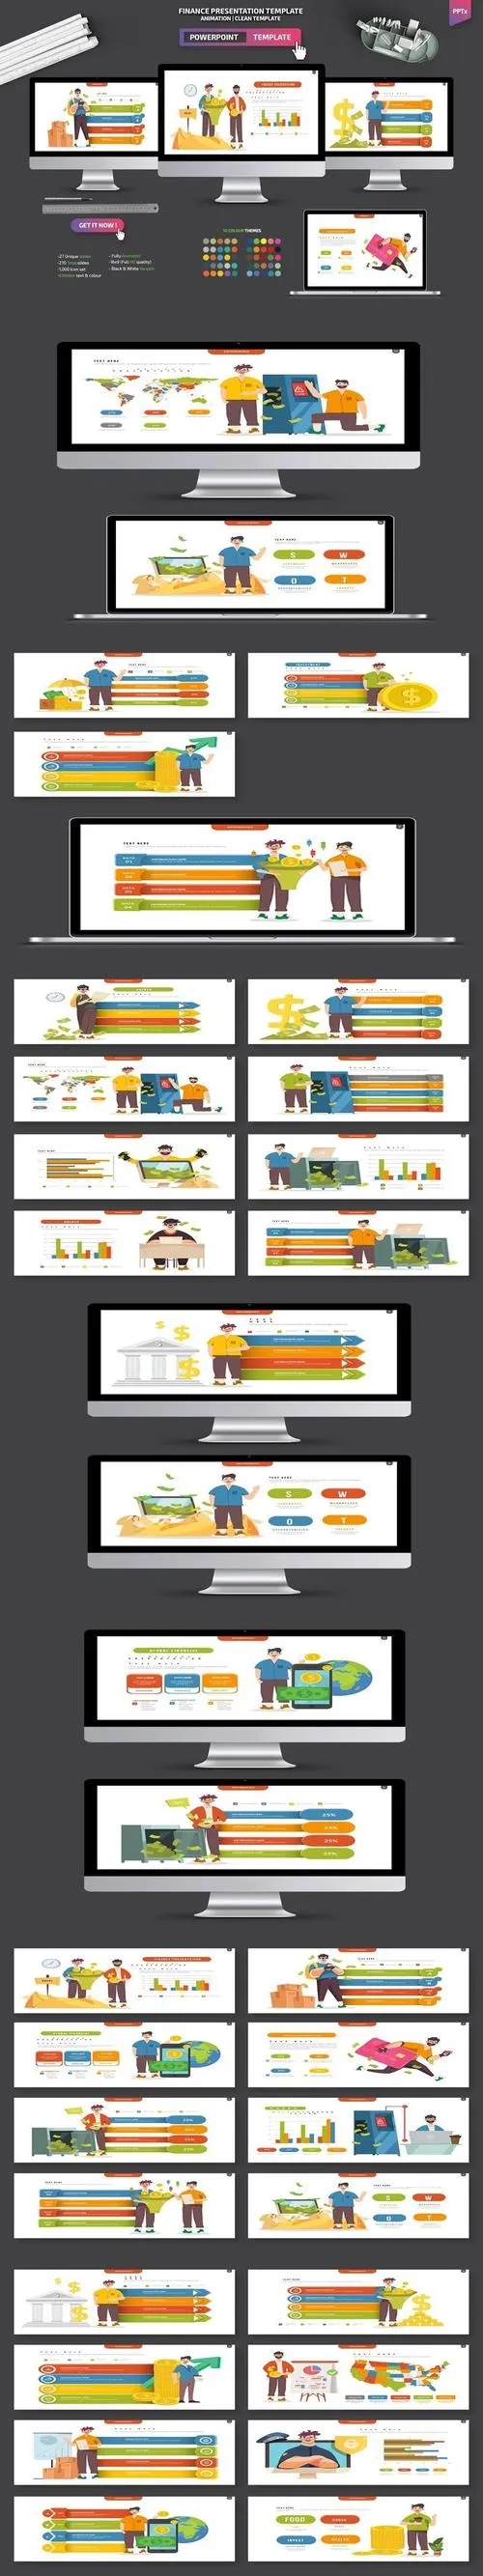 Finance Infographic Powerpoint Templates